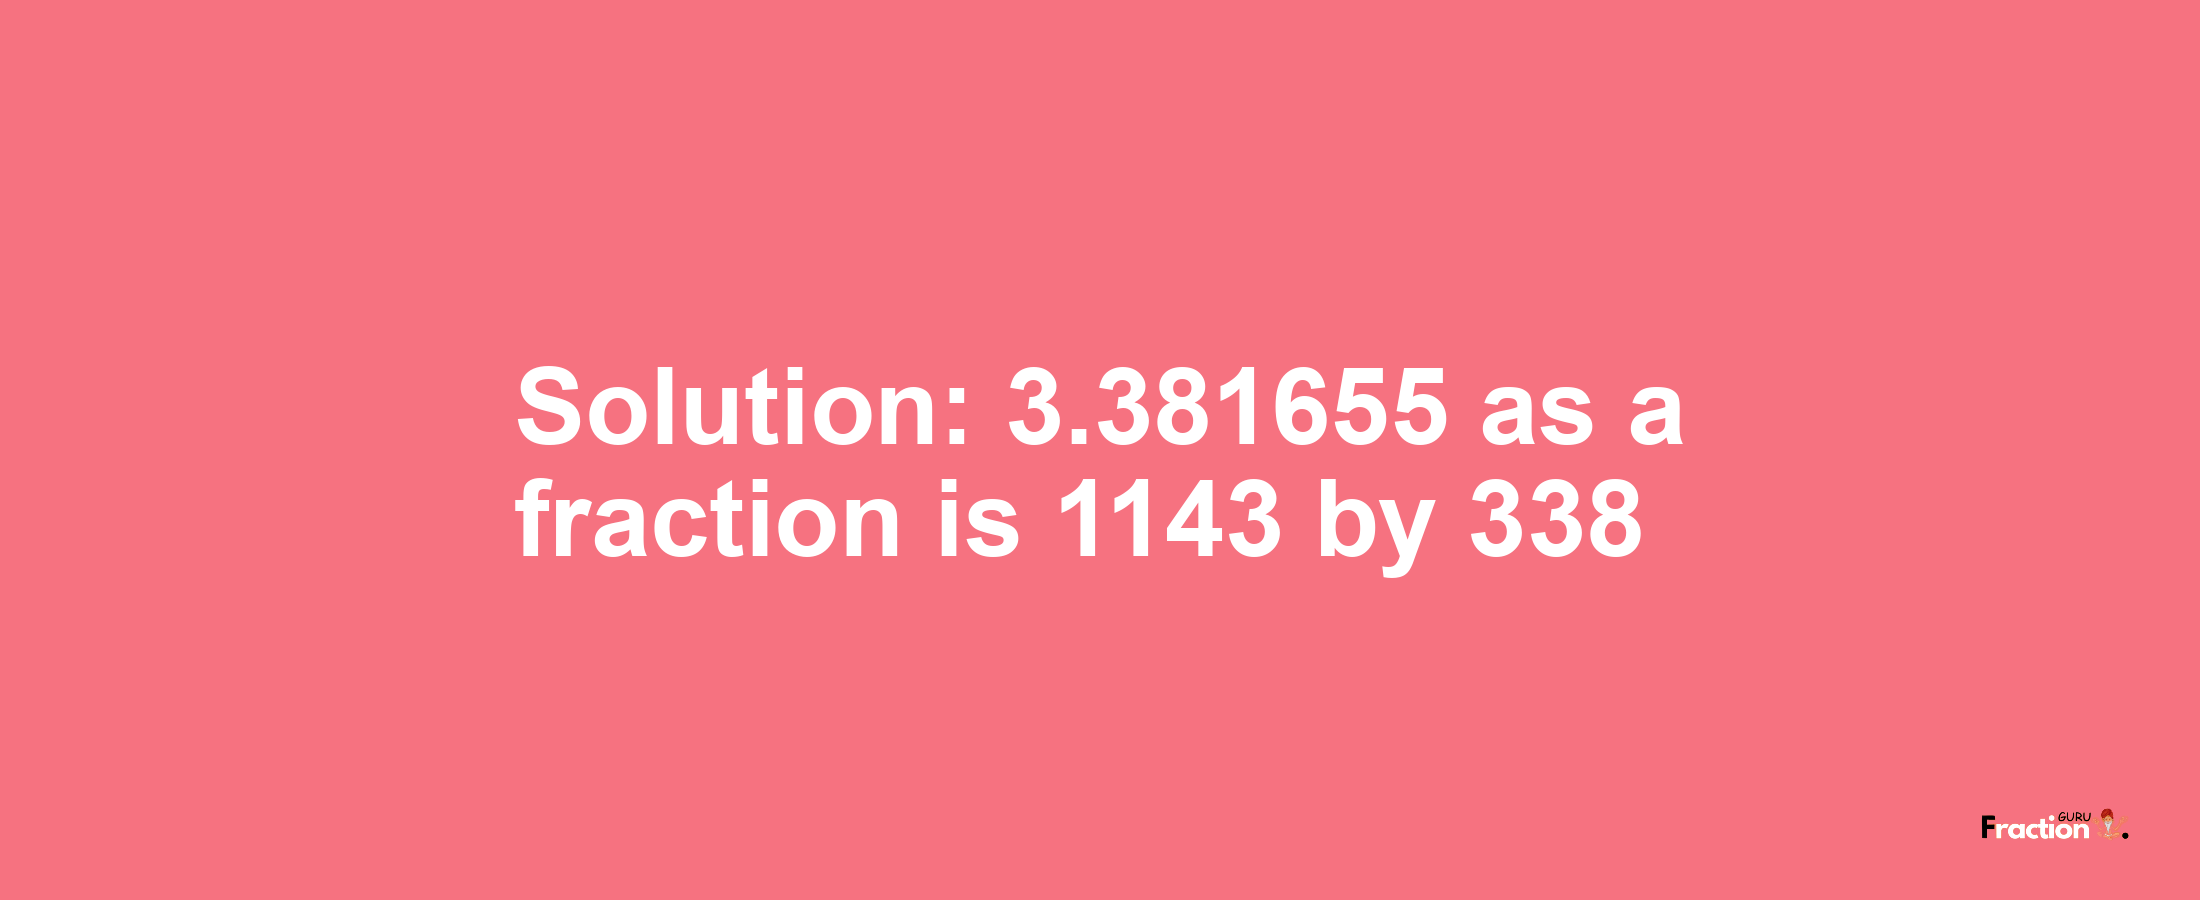 Solution:3.381655 as a fraction is 1143/338